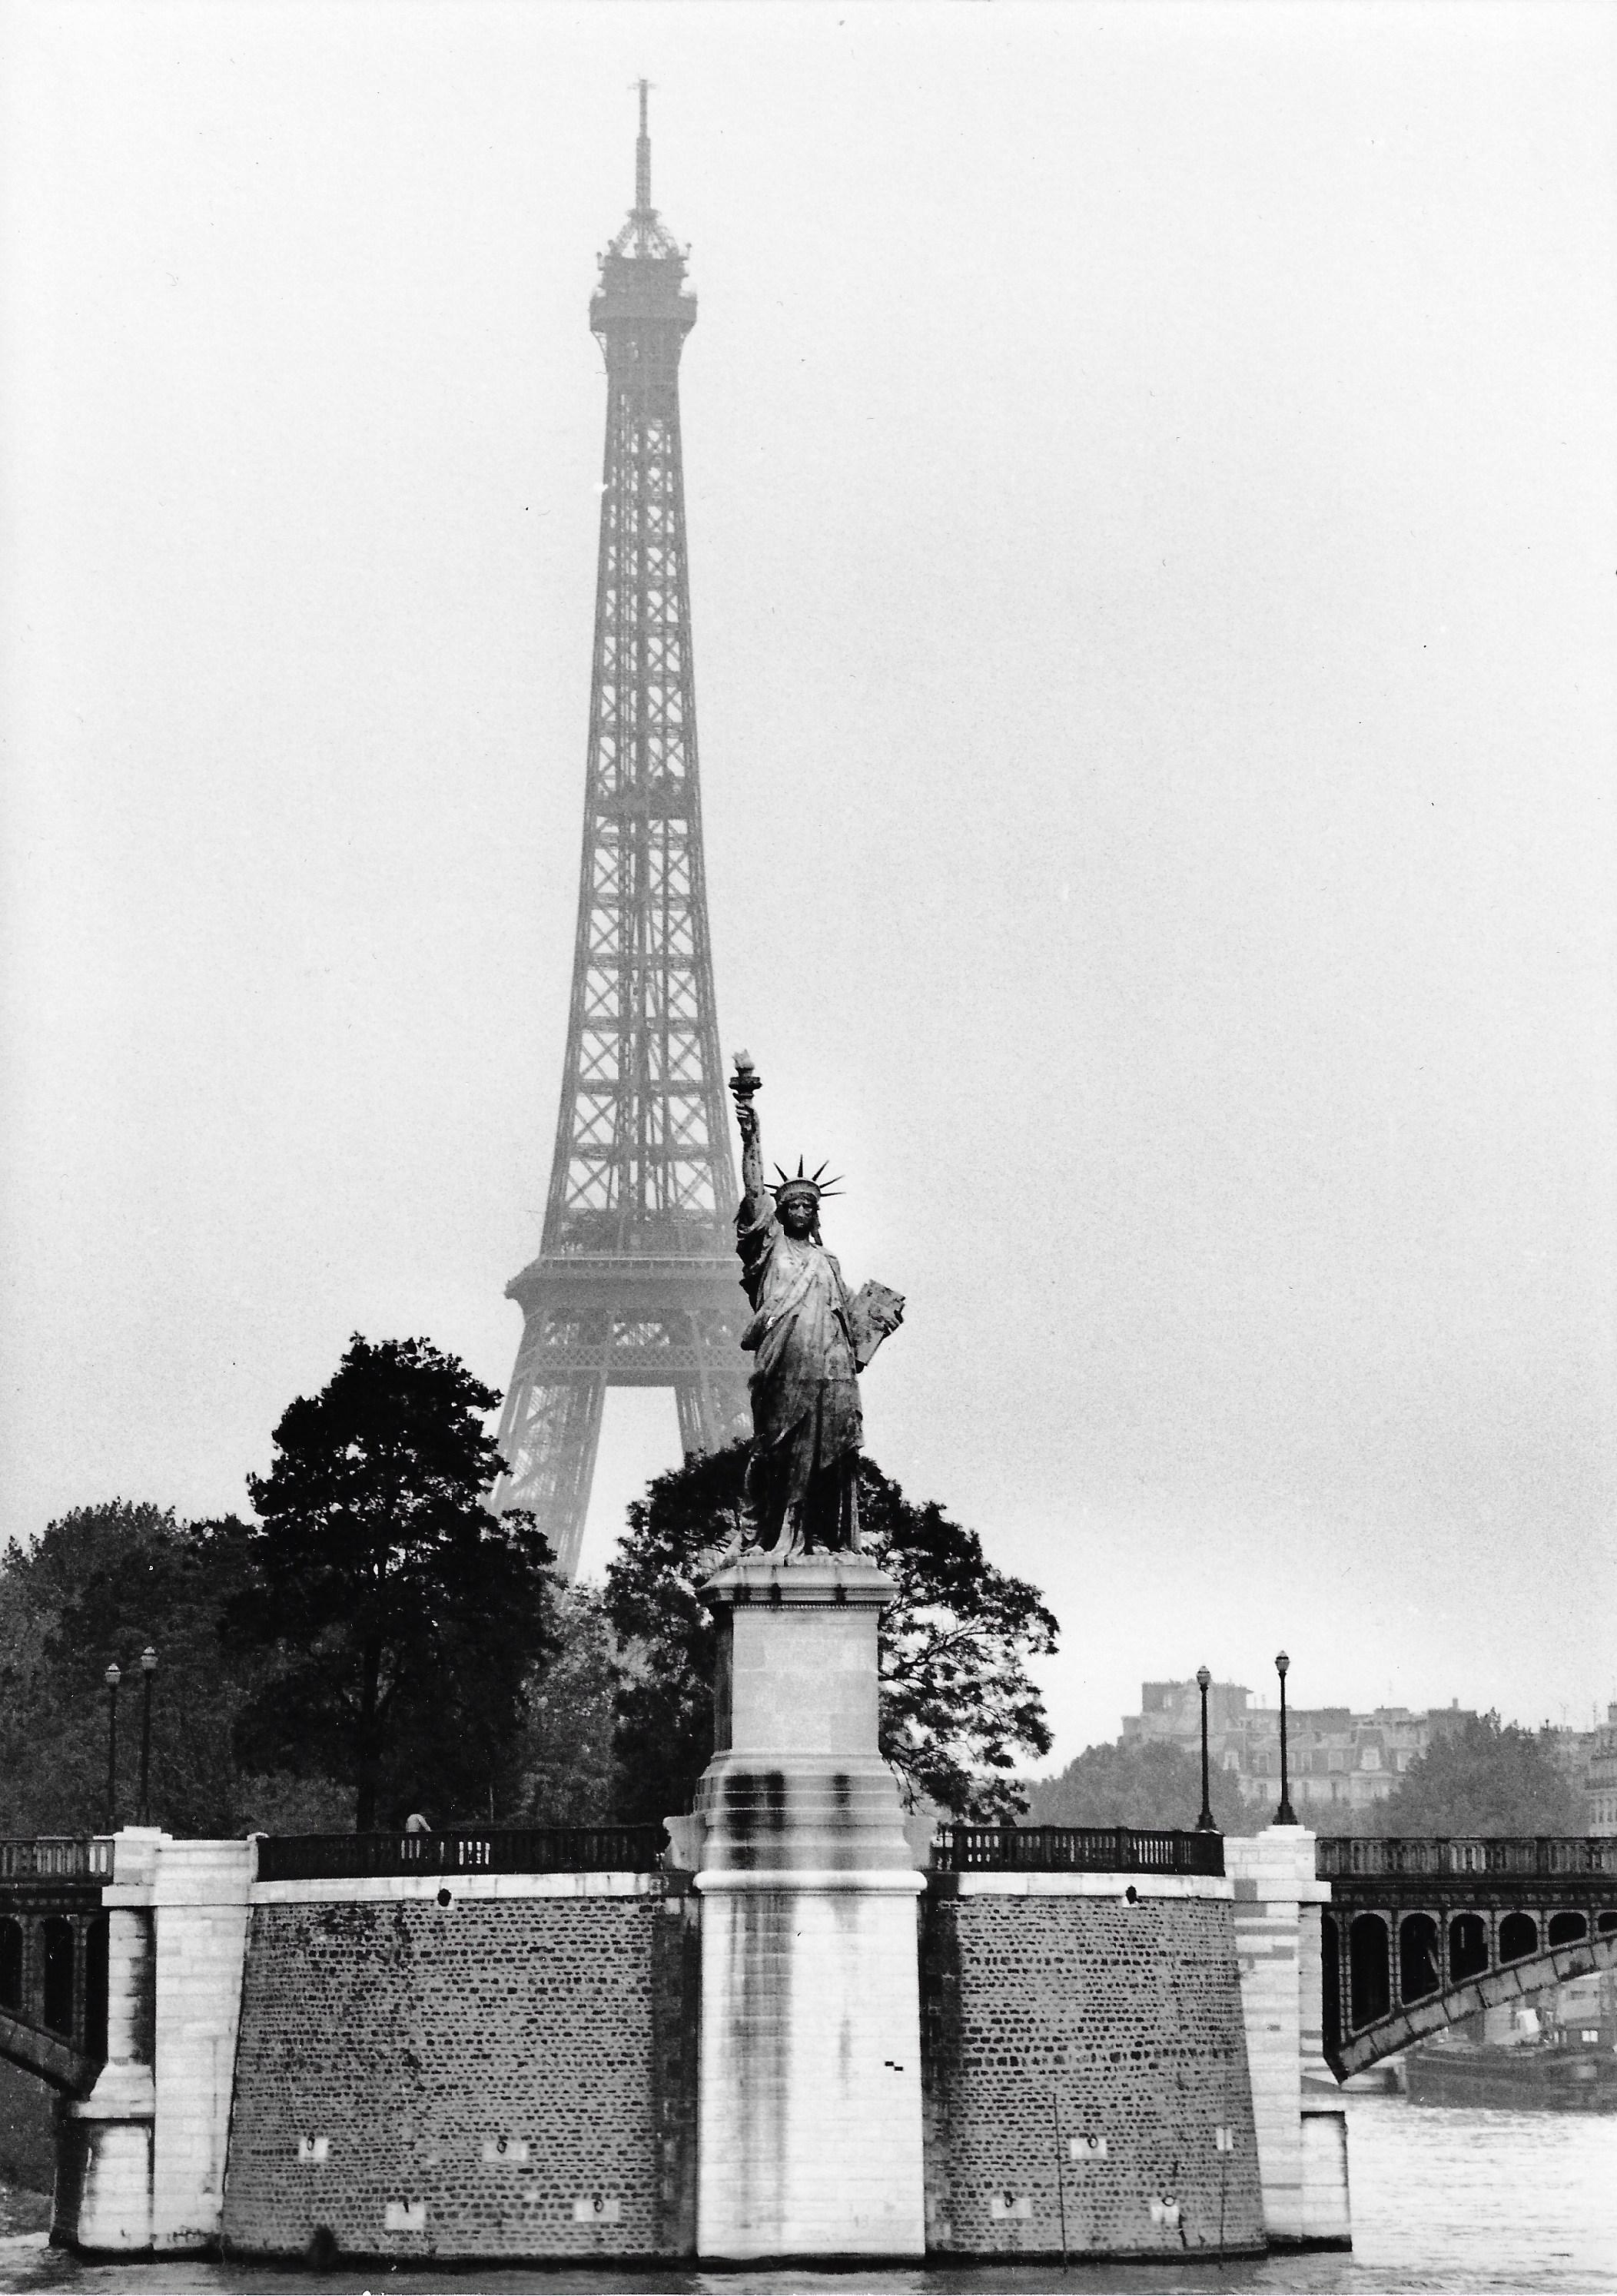 Ron Galella Landscape Photograph - The Eiffel Tower with Statue of Lady Liberty, 1965